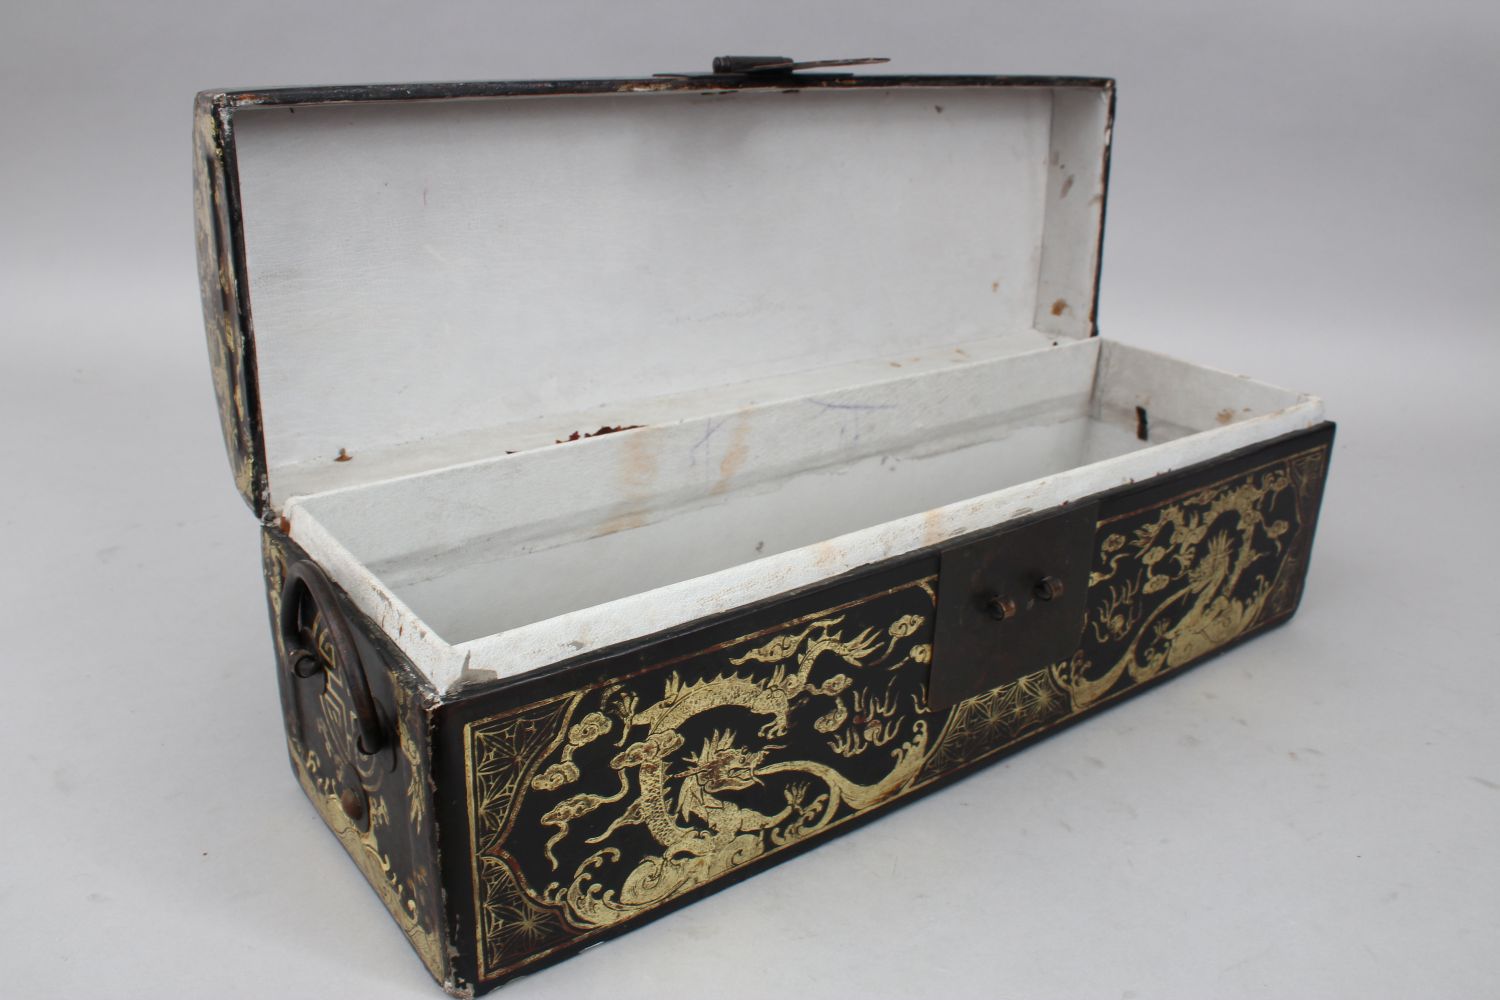 A GOOD 19TH CENTURY CHINESE LACQUER CHEST / BOX, the lacquer box with gilded decoration of dragons - Image 9 of 12